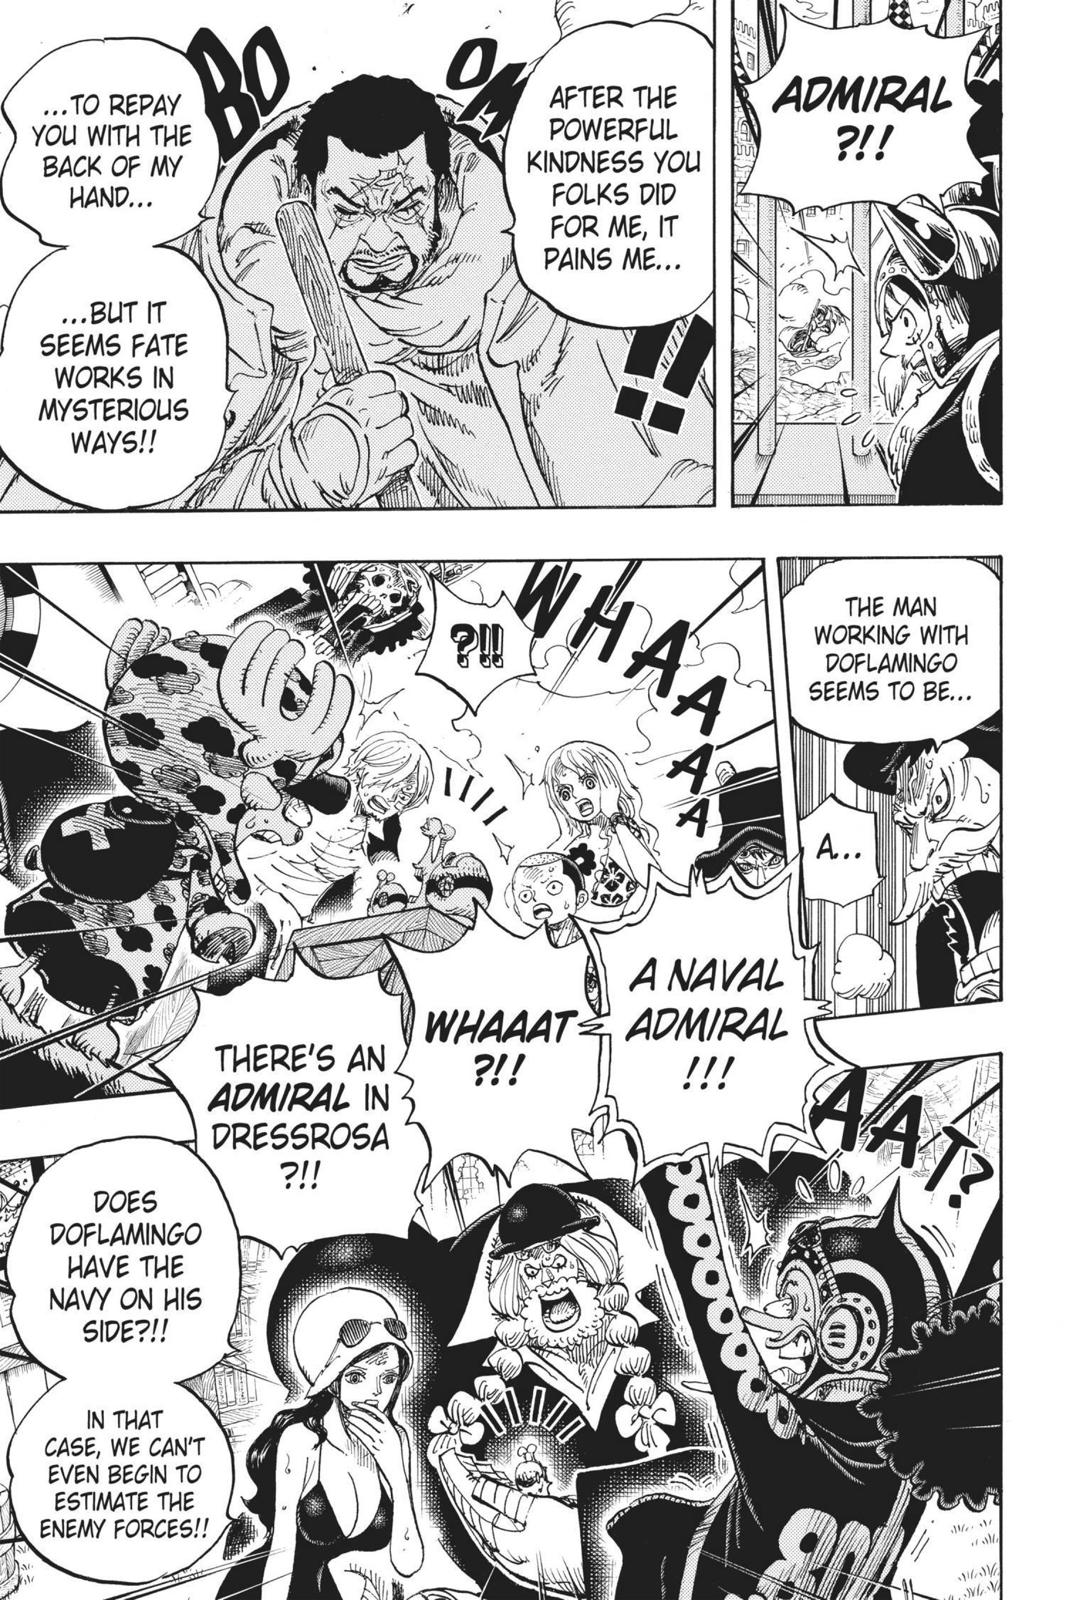 One Piece Chapter 730 One Piece Manga Online